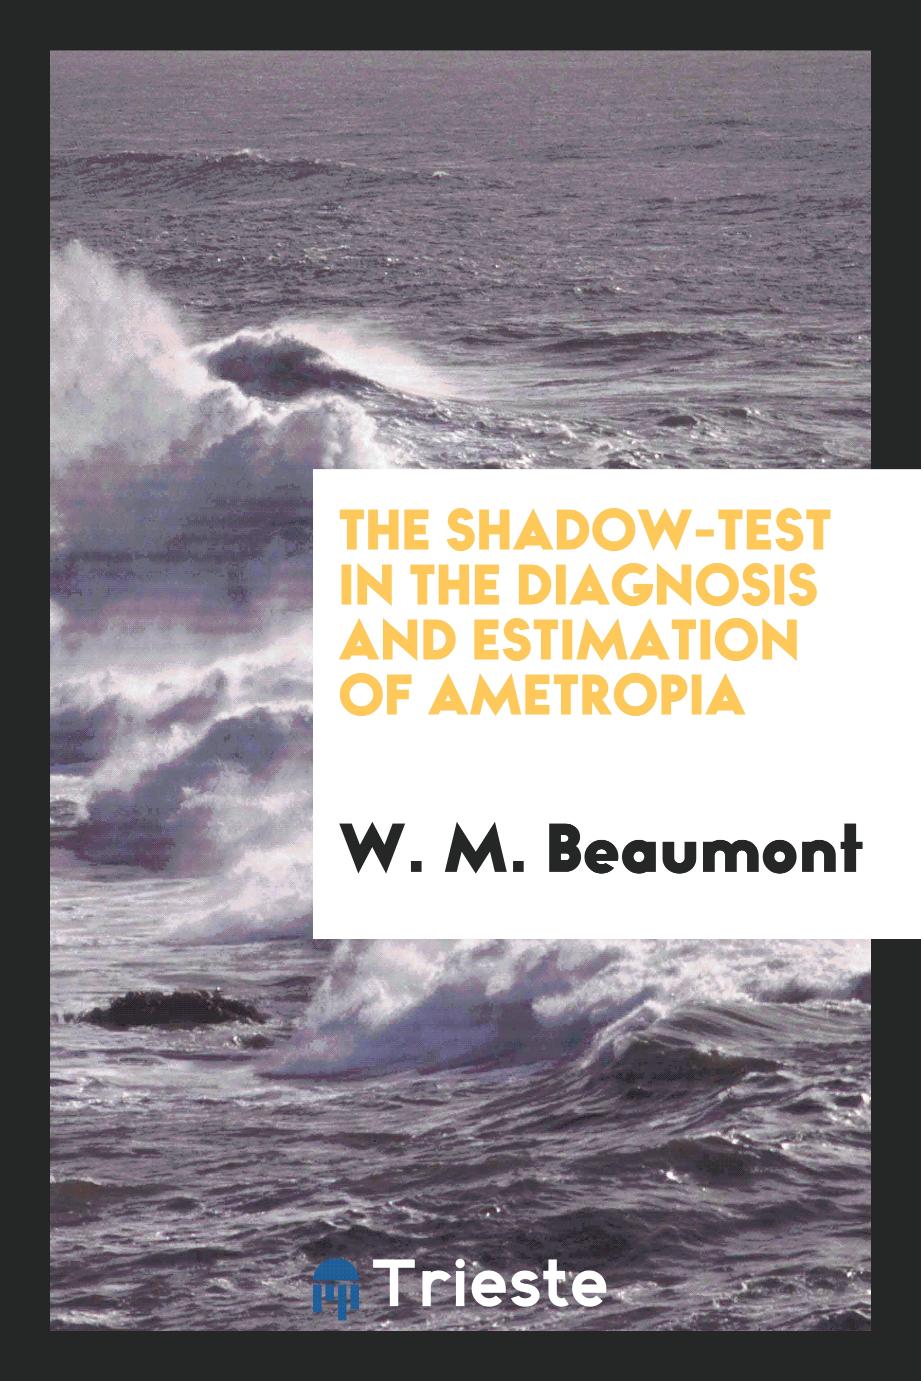 The Shadow-test in the Diagnosis and Estimation of Ametropia